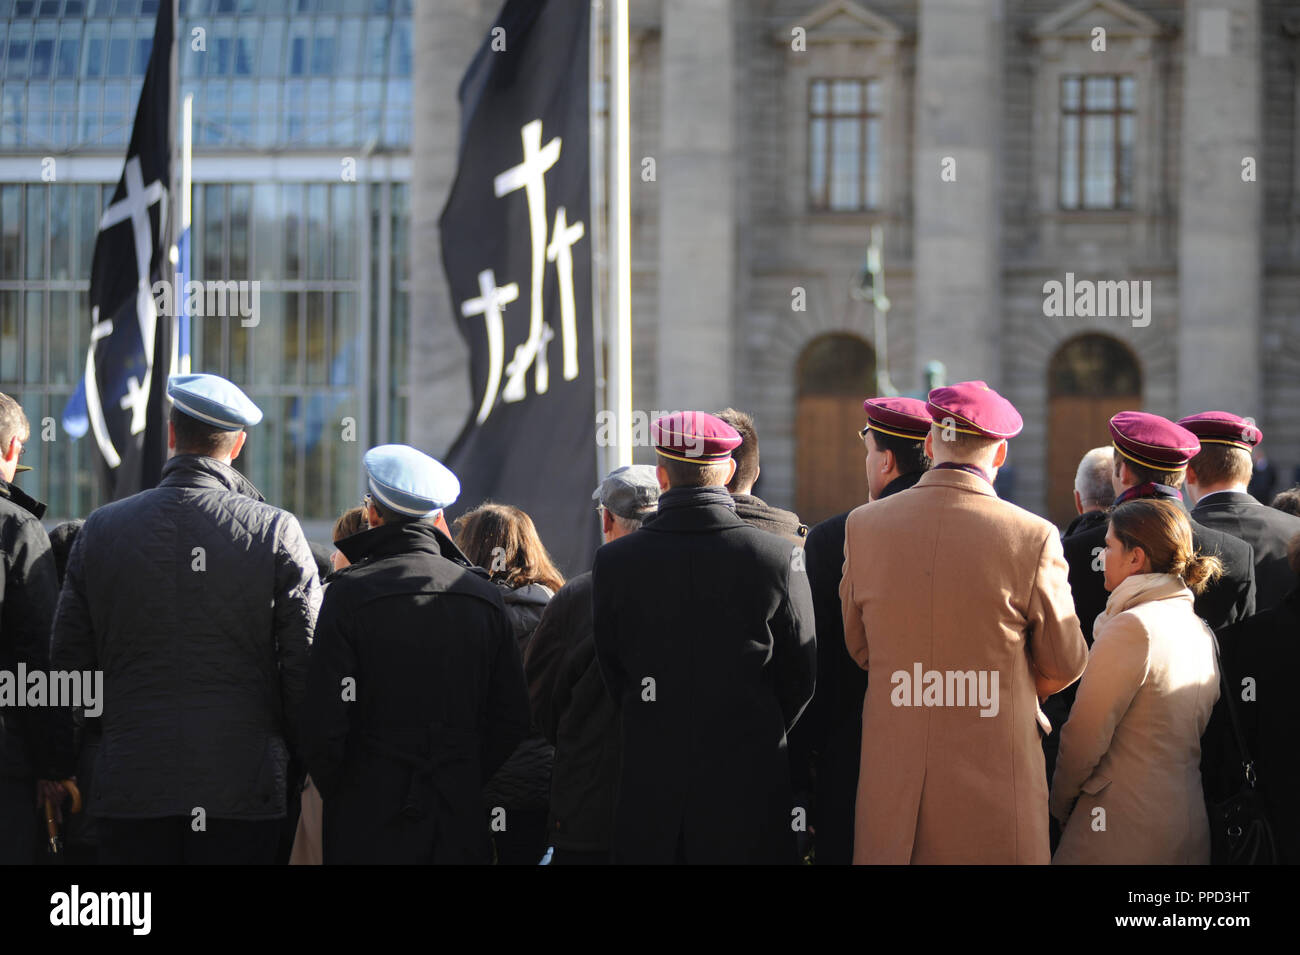 Parade of right-wing Burschenschaftern (student fraternities) on the Volkstrauertag (National Day of Mourning) as part of the memorial event at the Kriegerdenkmal (War Memorial) in the Hofgarten in Munich. Stock Photo